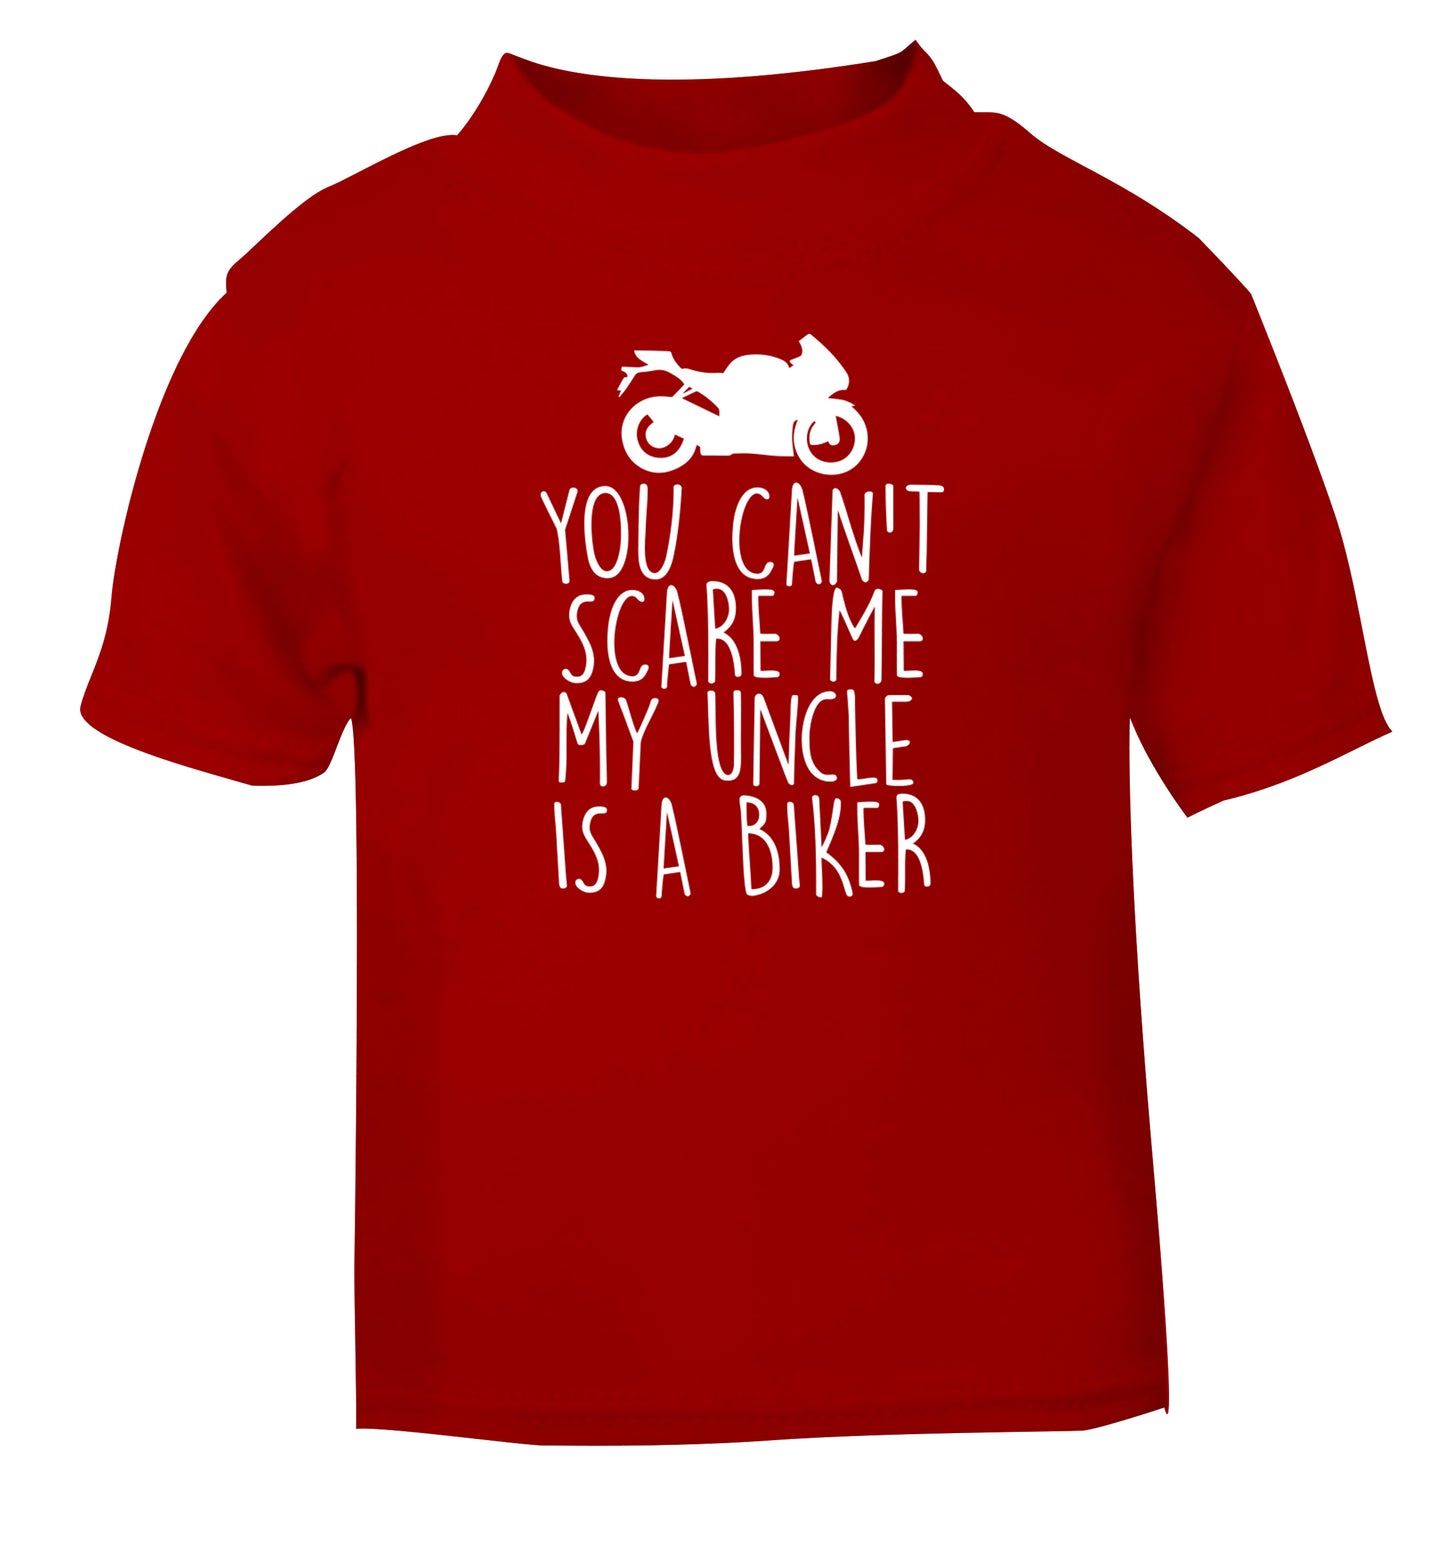 You can't scare me my uncle is a biker red Baby Toddler Tshirt 2 Years